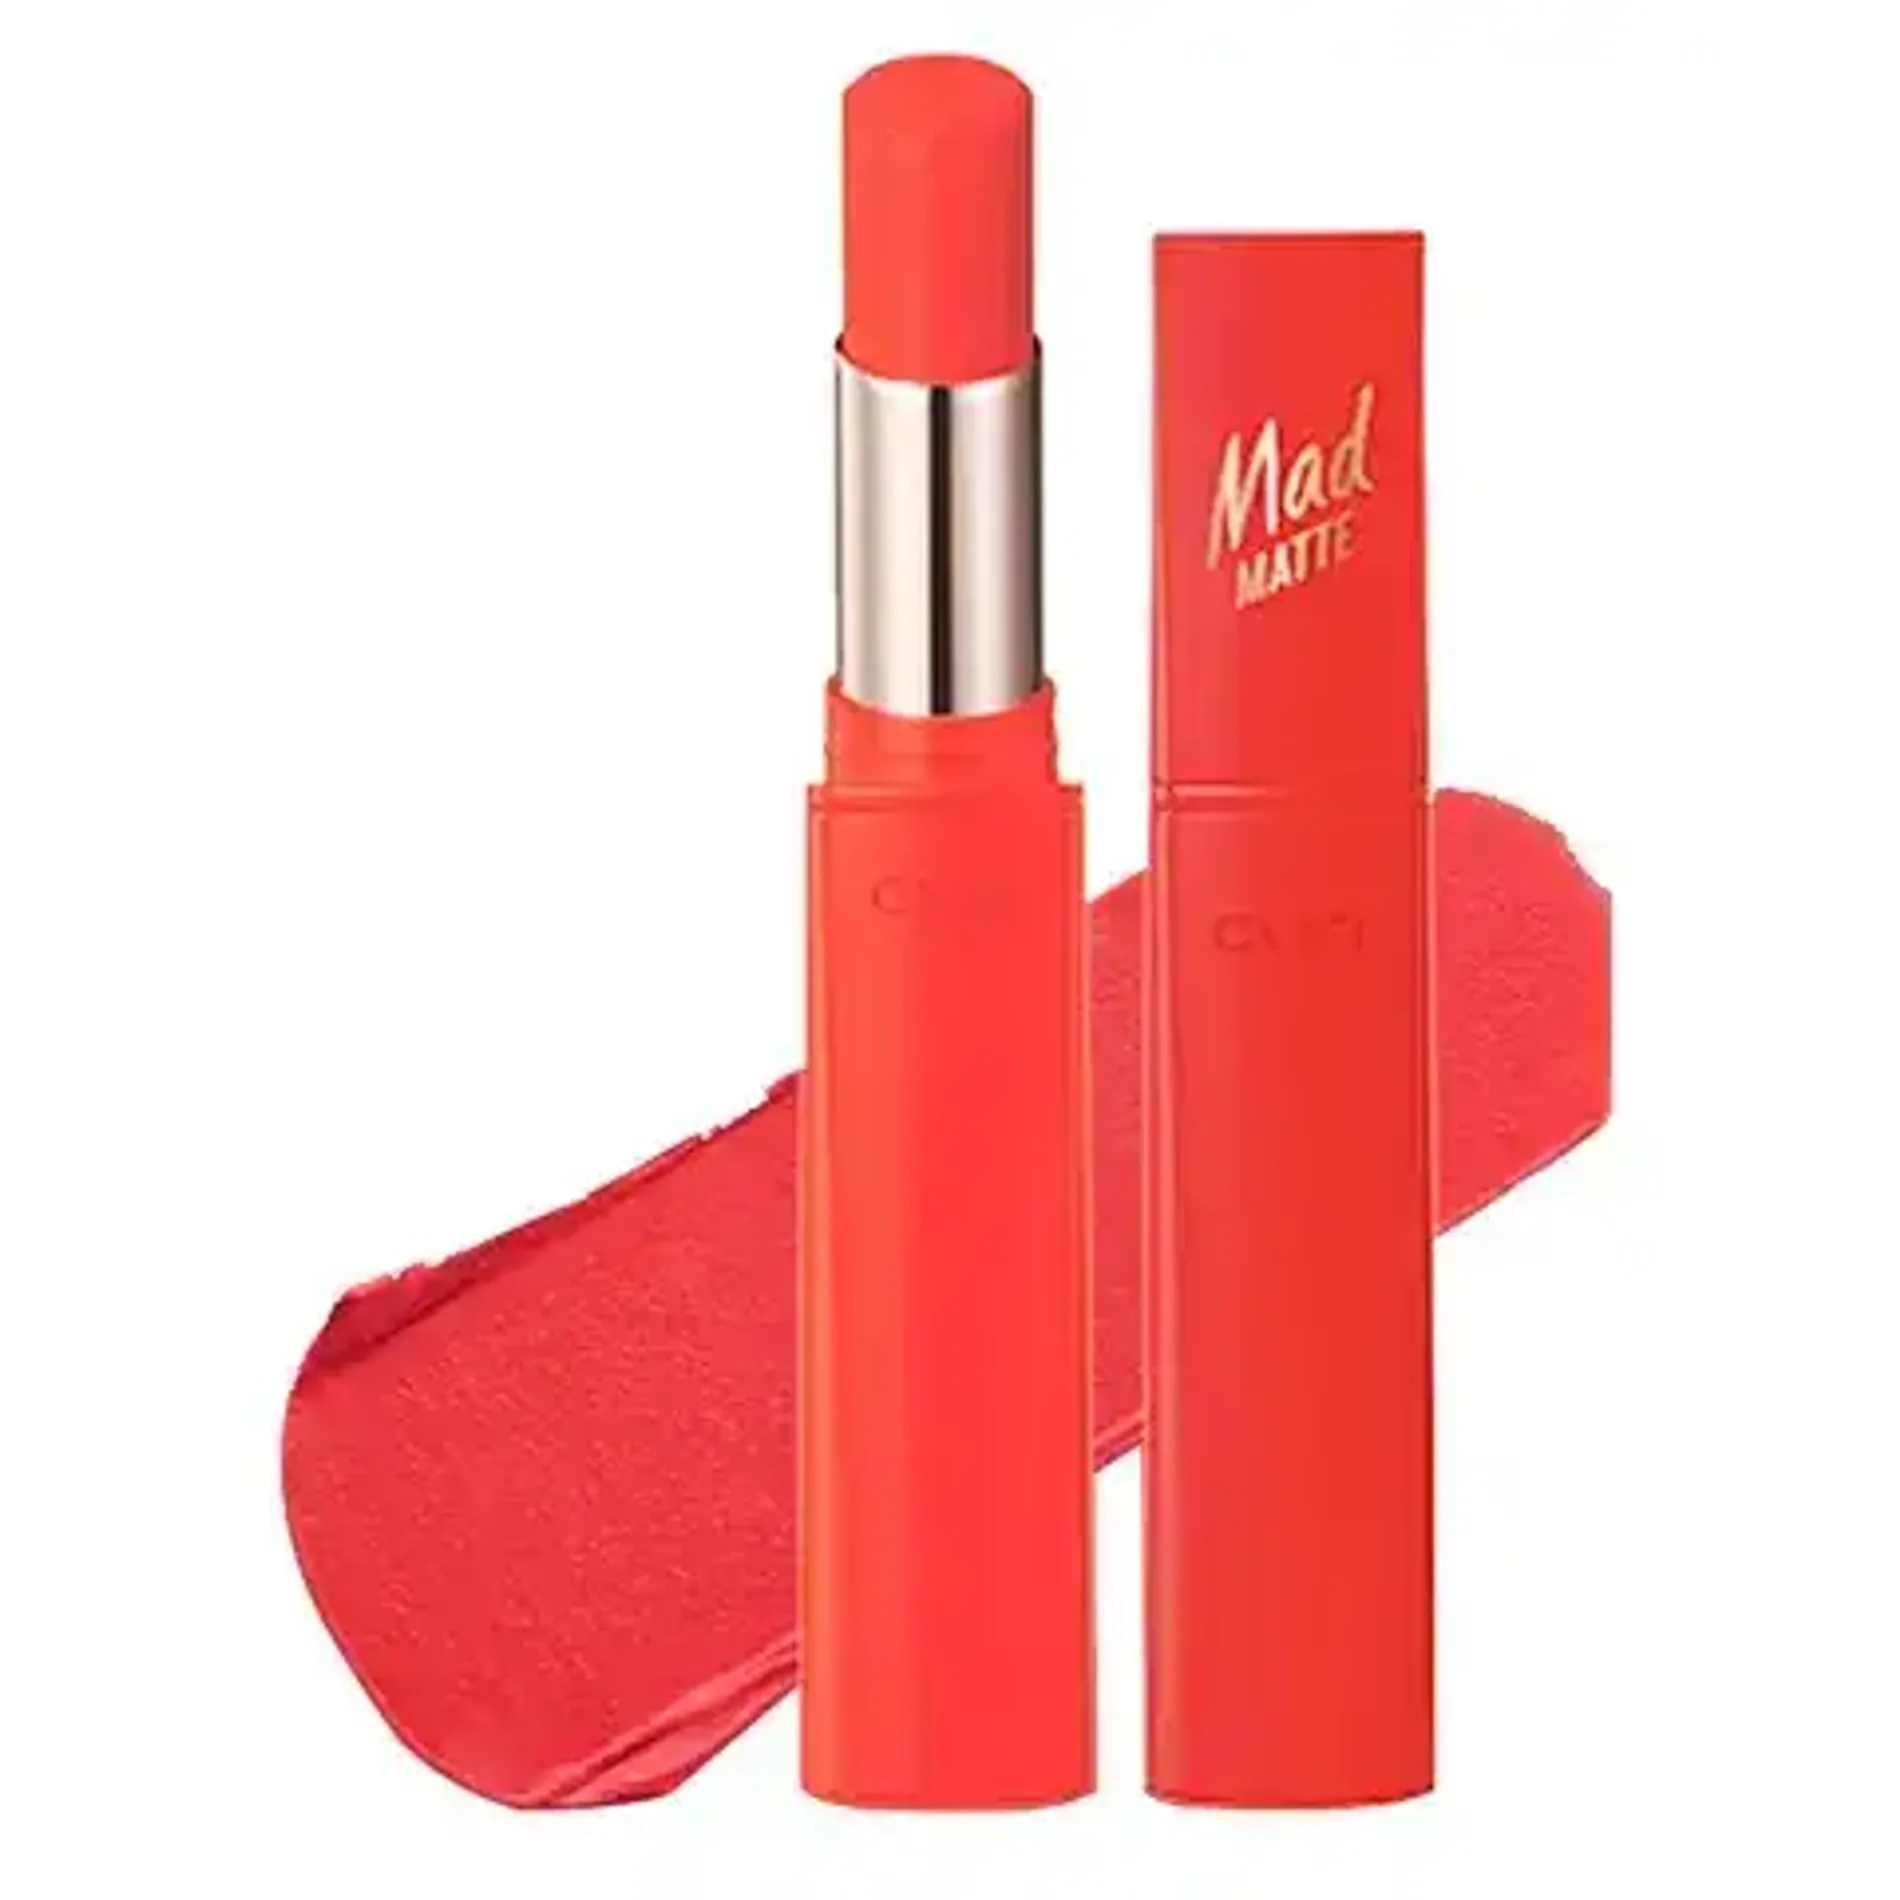 gift-son-thoi-hieu-ung-li-nhe-clio-mad-matte-stain-lips-3-3g-1